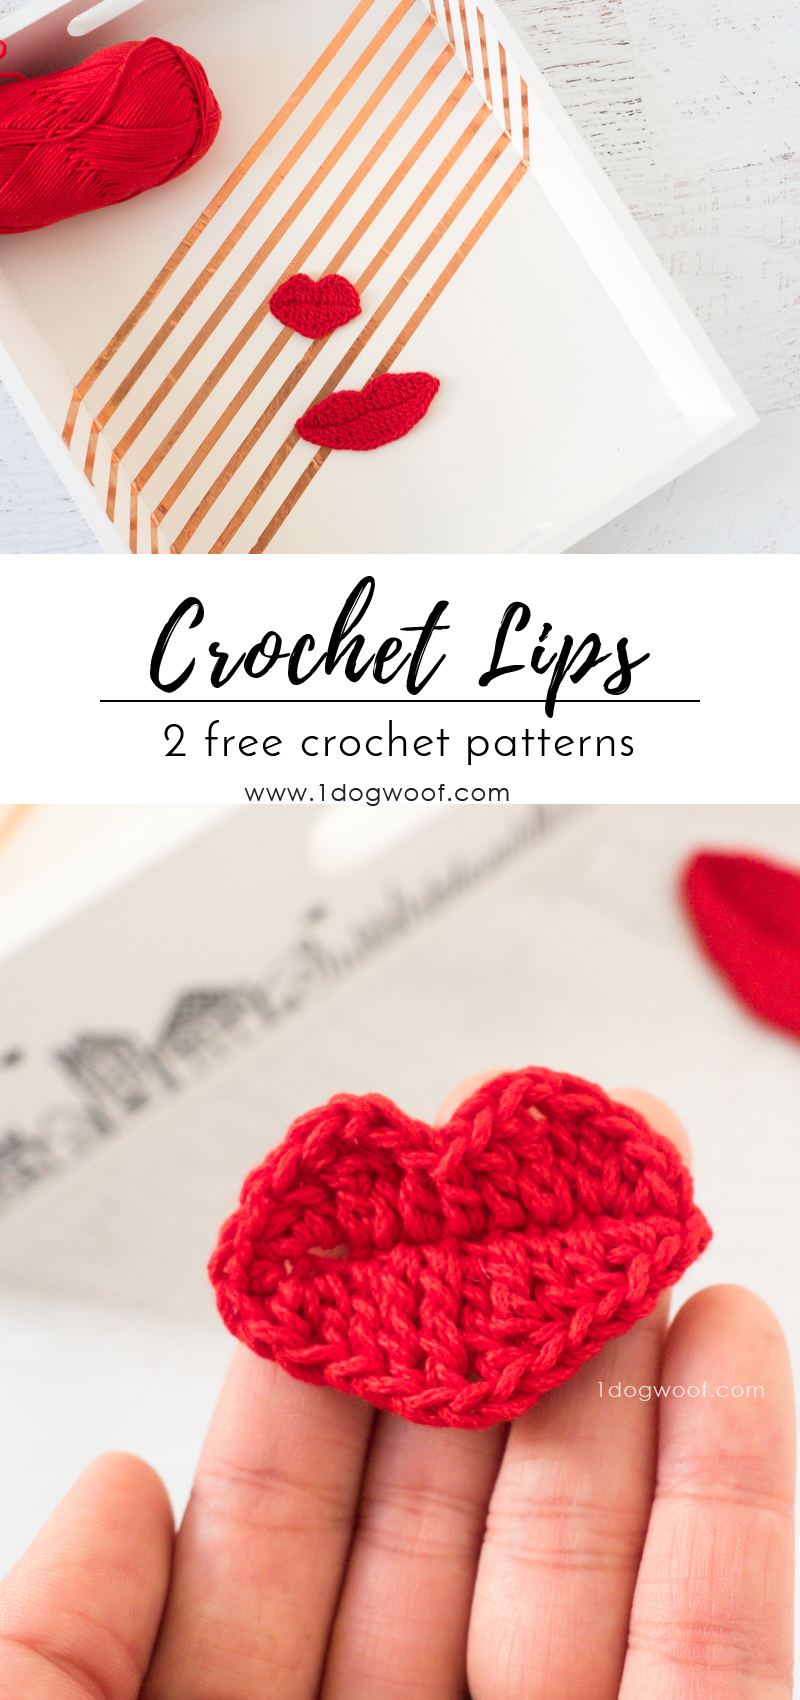 Free crochet patterns for 2 different types of lips appliques | www.1dogwoof.com